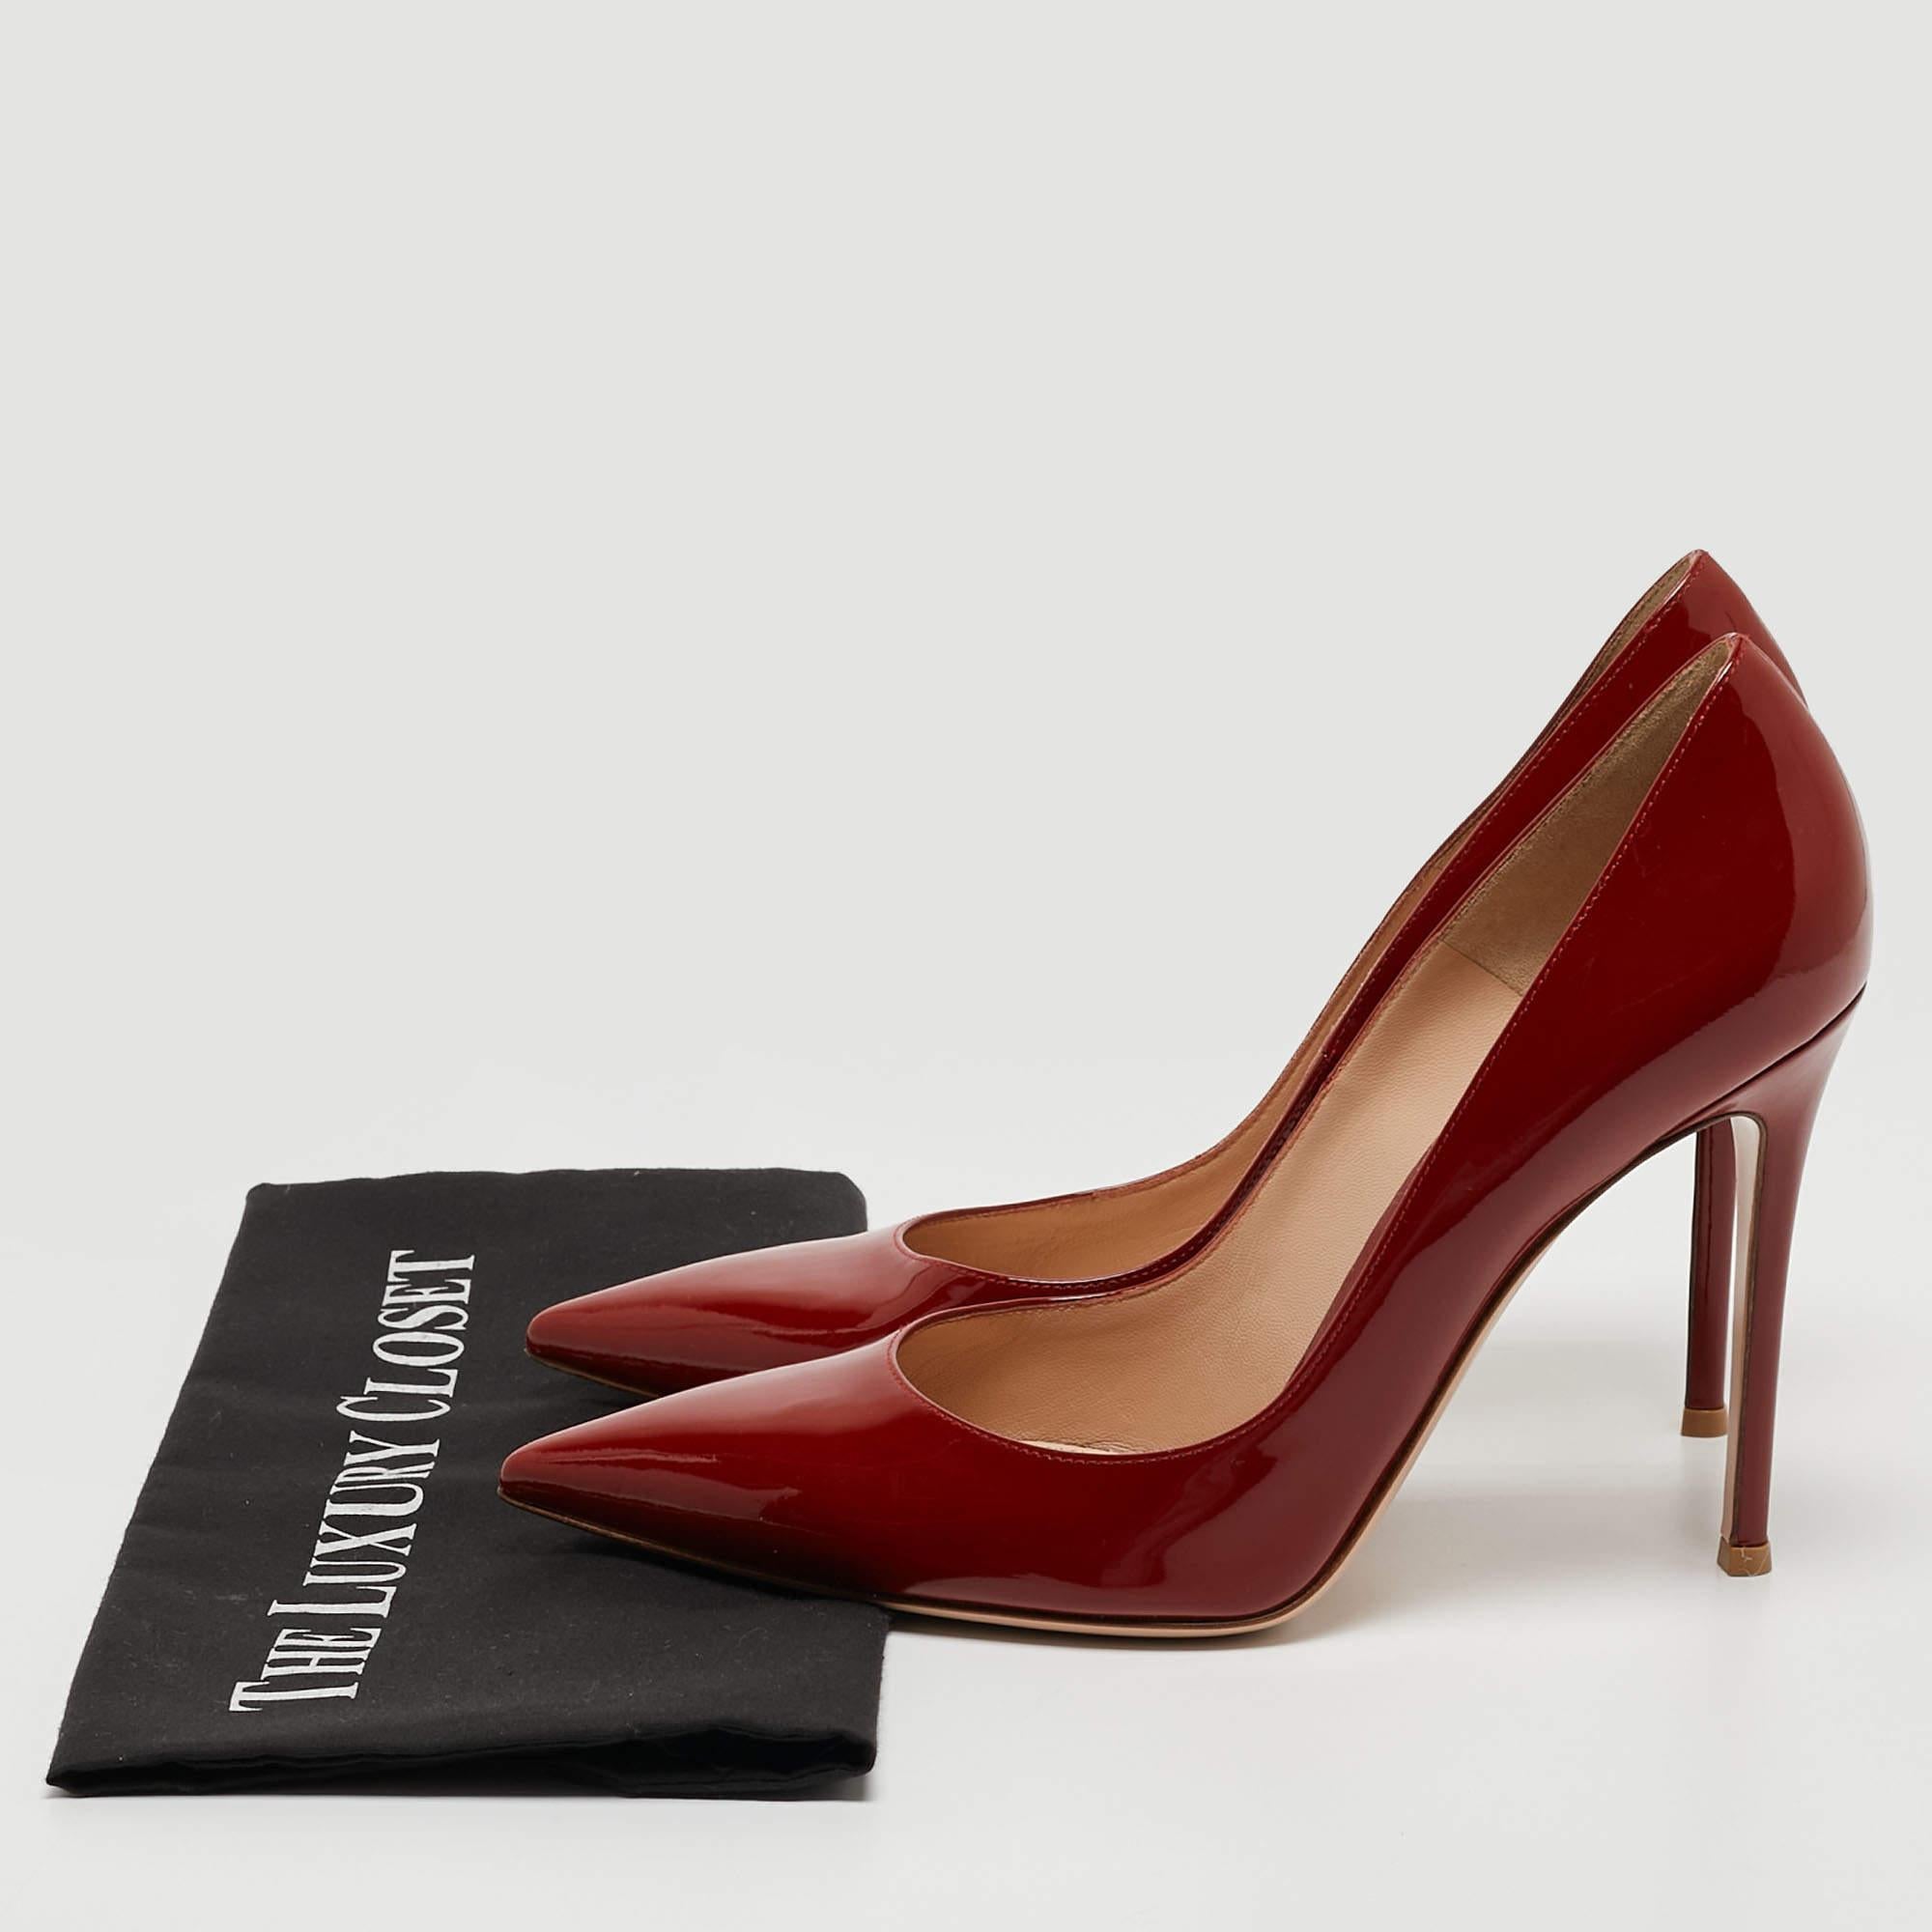 Gianvito Rossi Dark Red Patent Leather Pointed Toe Pumps Size 41 For Sale 5